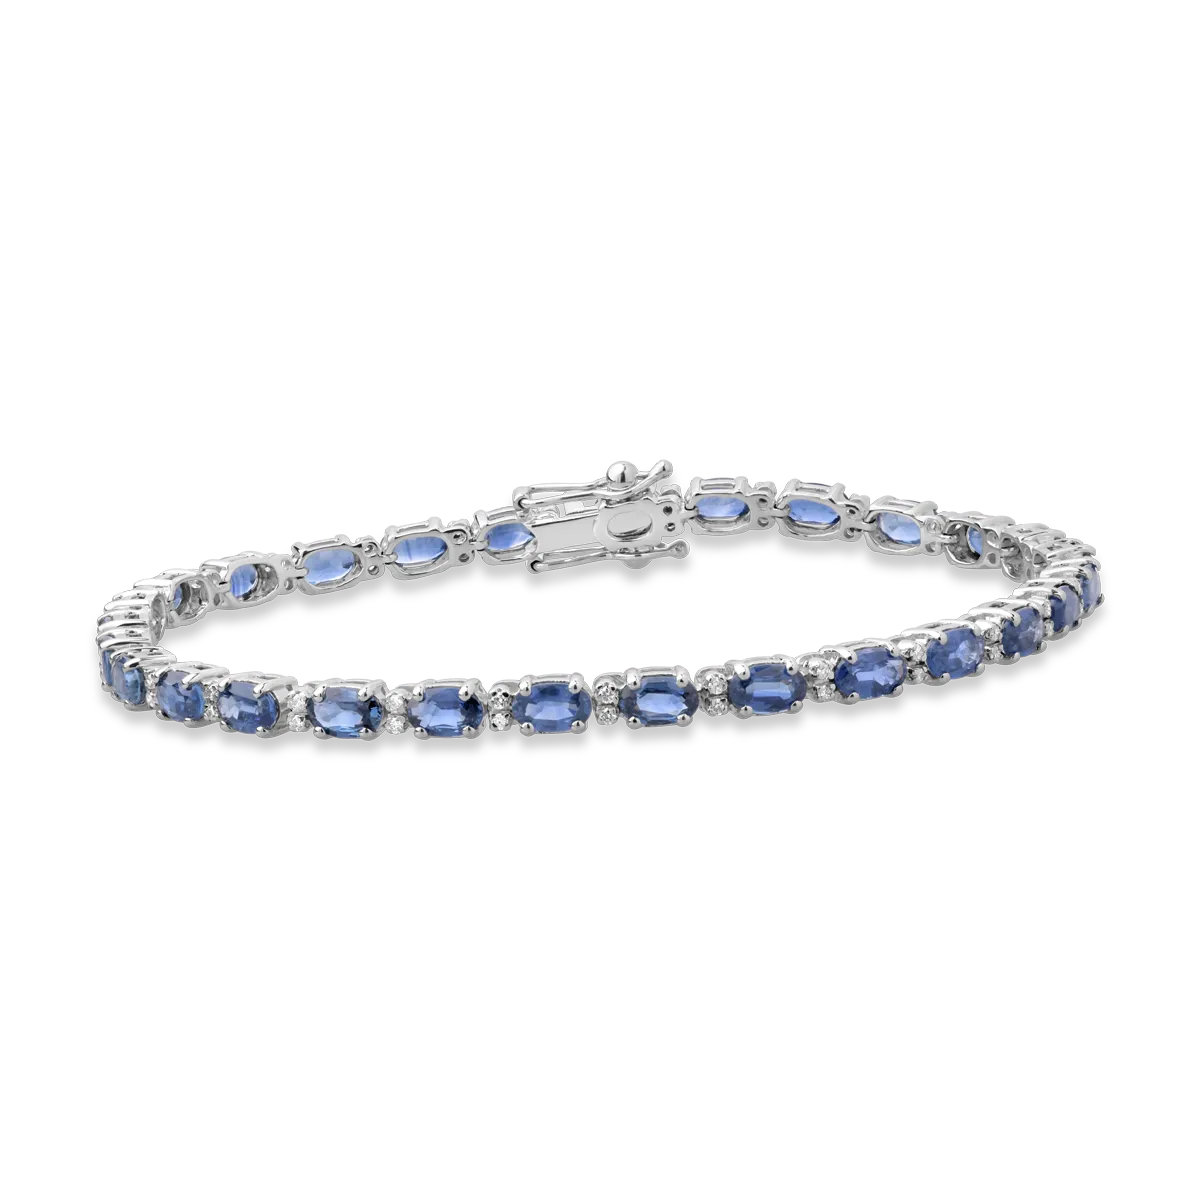 14K white gold tennis bracelet with 6.72ct treated sapphires and 0.24ct diamonds